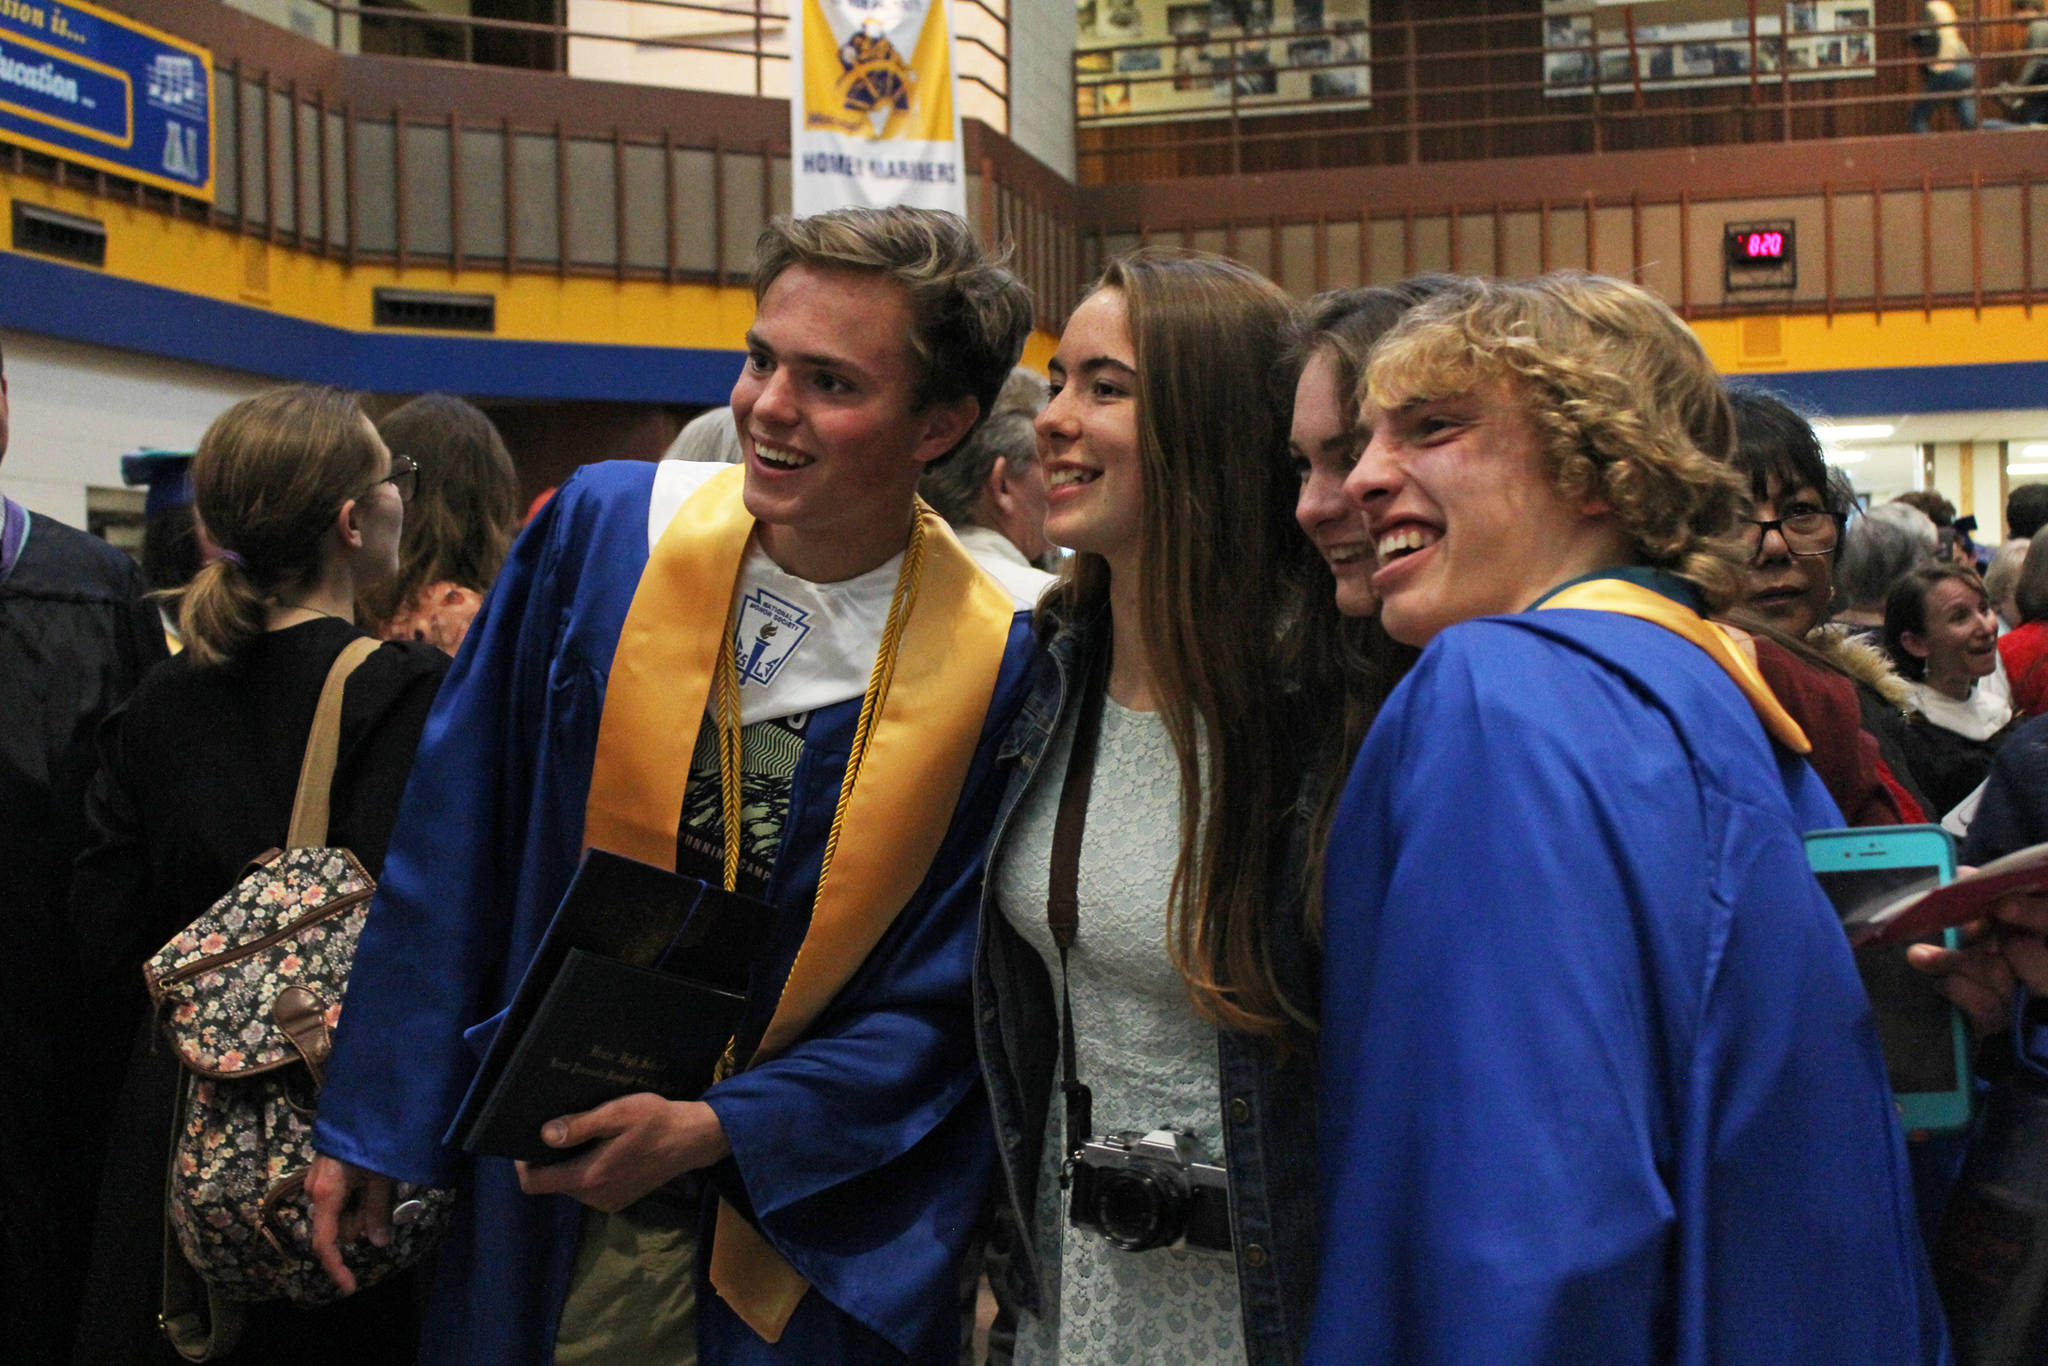 Homer High School graduates Denver Waclawski (far left) and Jacob Davis (far right) pose with friends for a photo after their commencement ceremony Tuesday, May 22, 2018 at the school in Homer, Alaska. (Photo by Megan Pacer/Homer News)